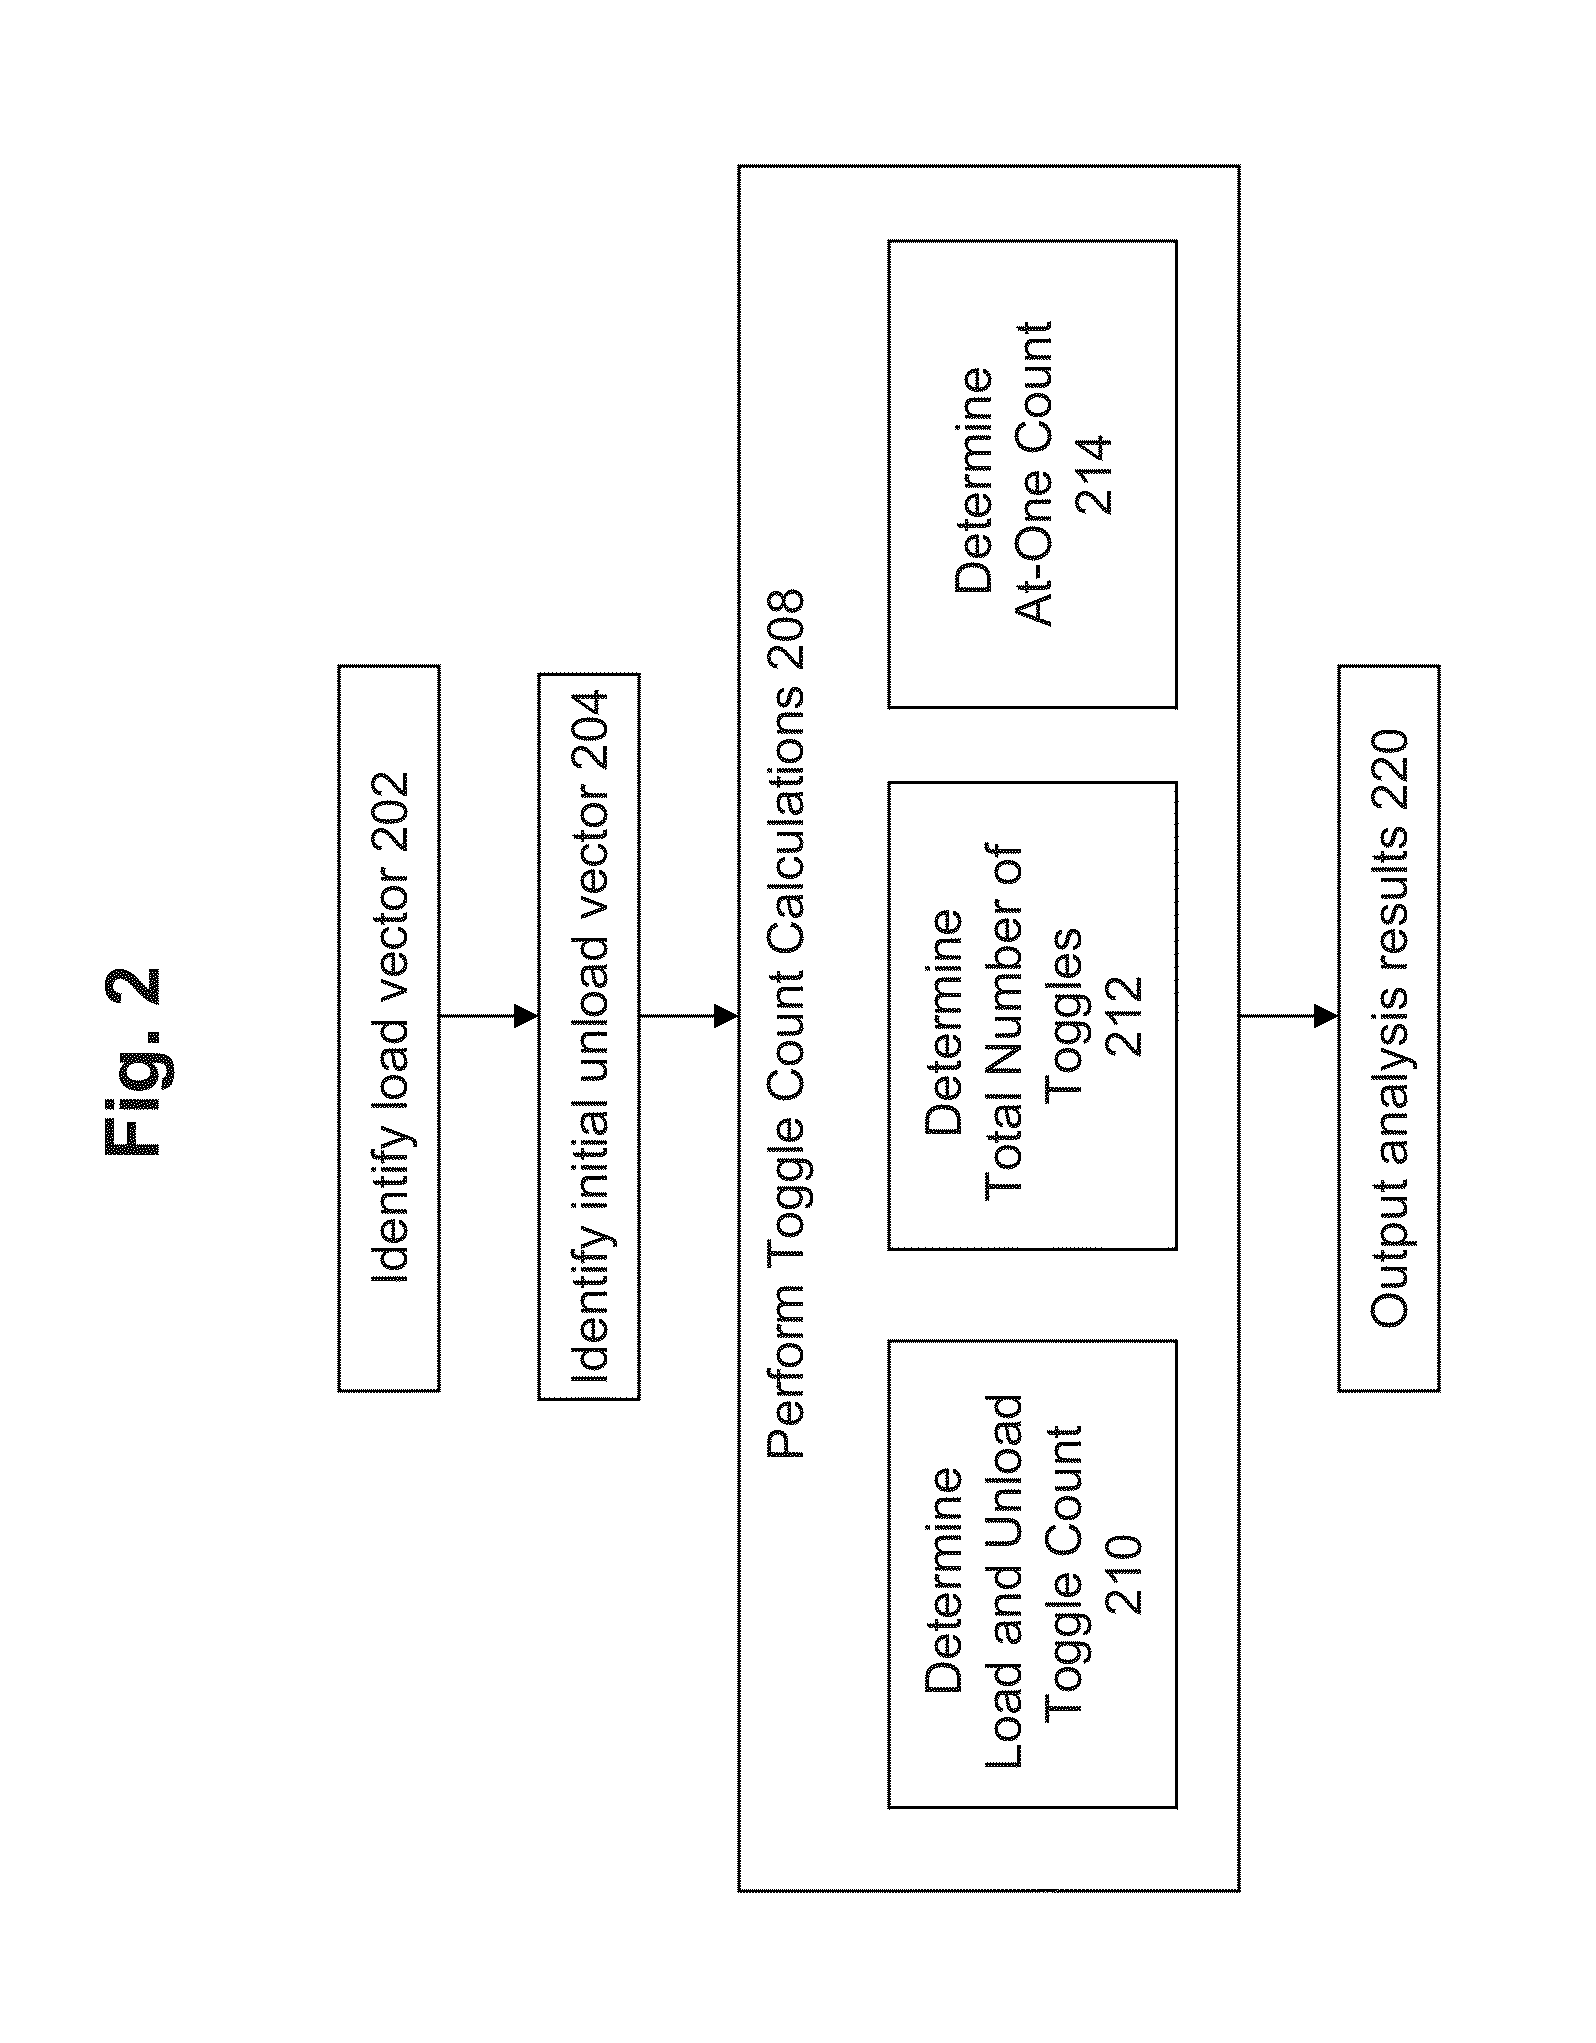 Method and system for analyzing test vectors to determine toggle counts